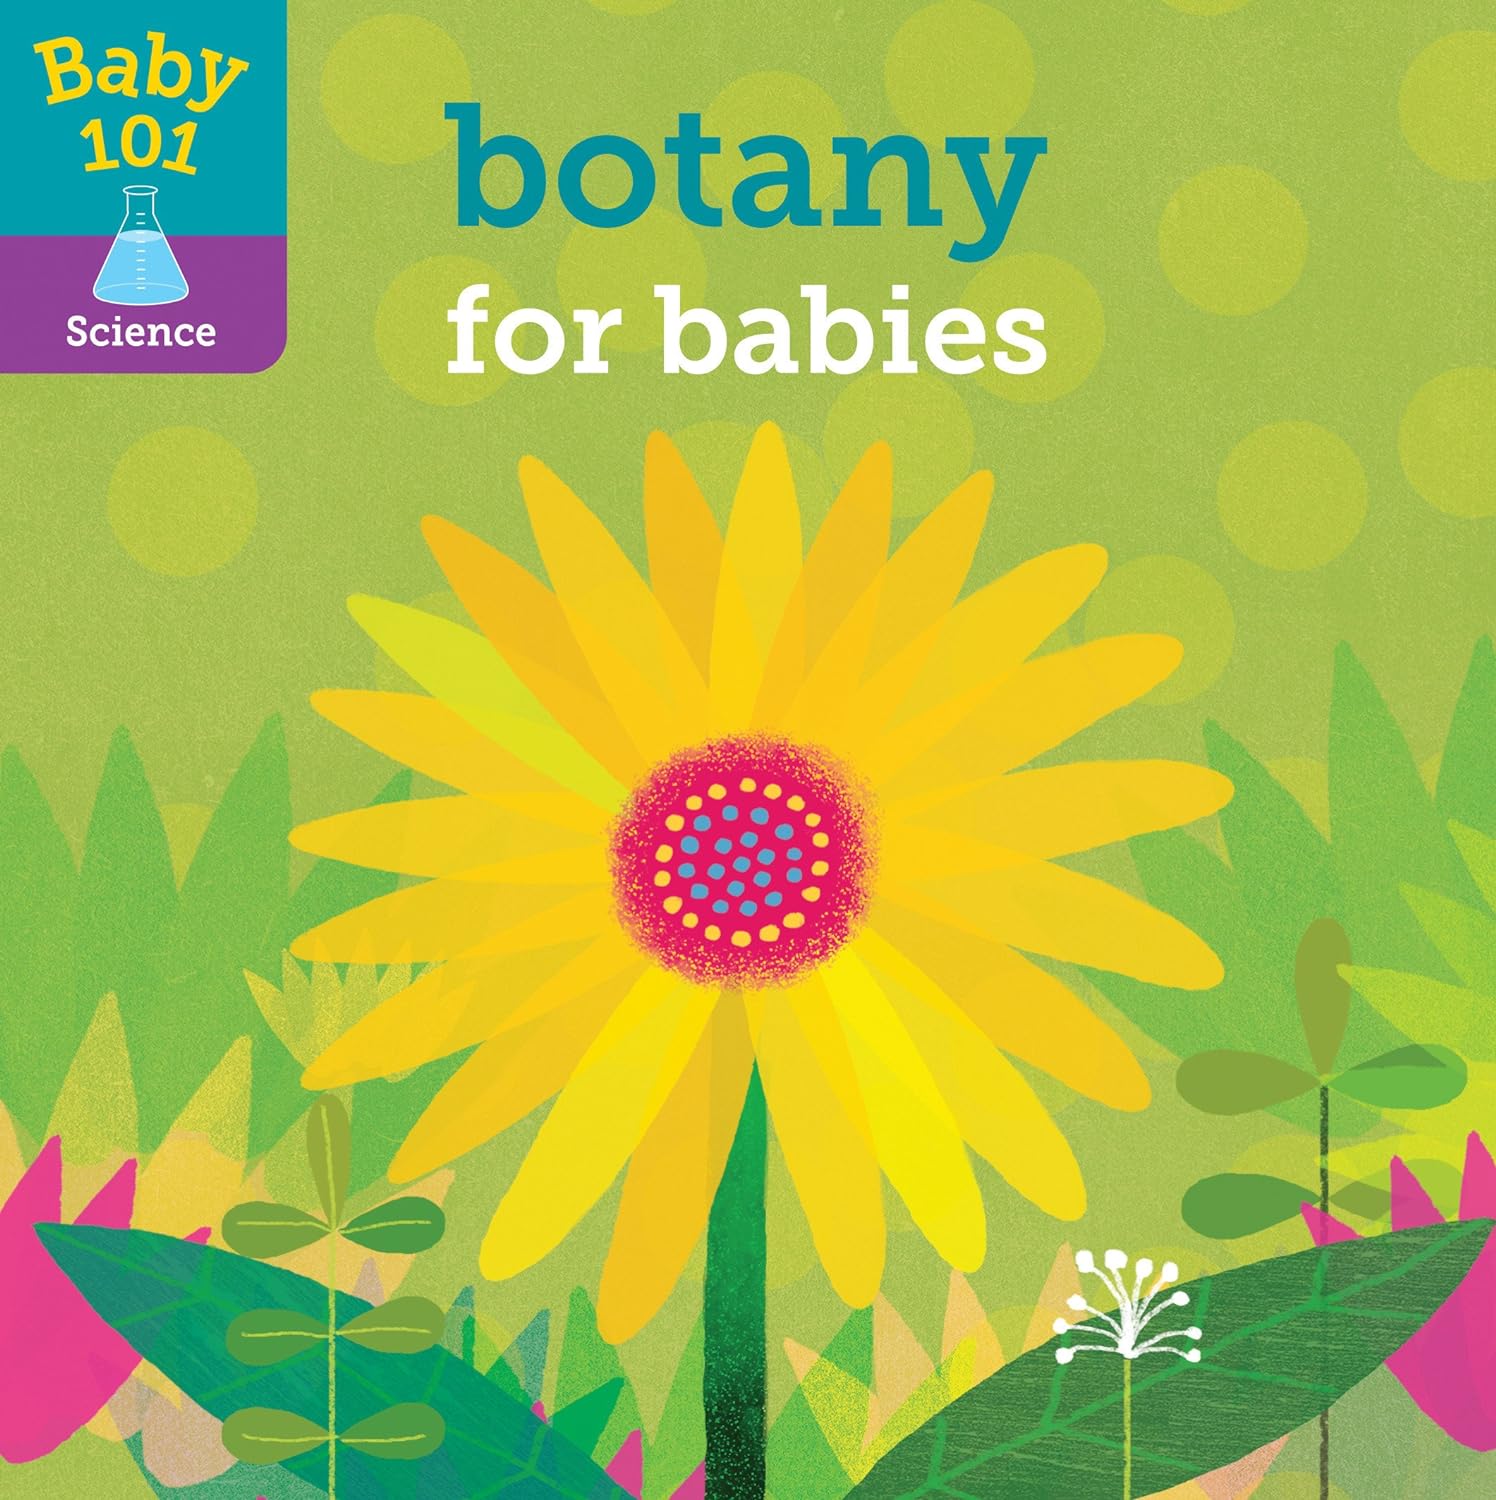 Botany for babies